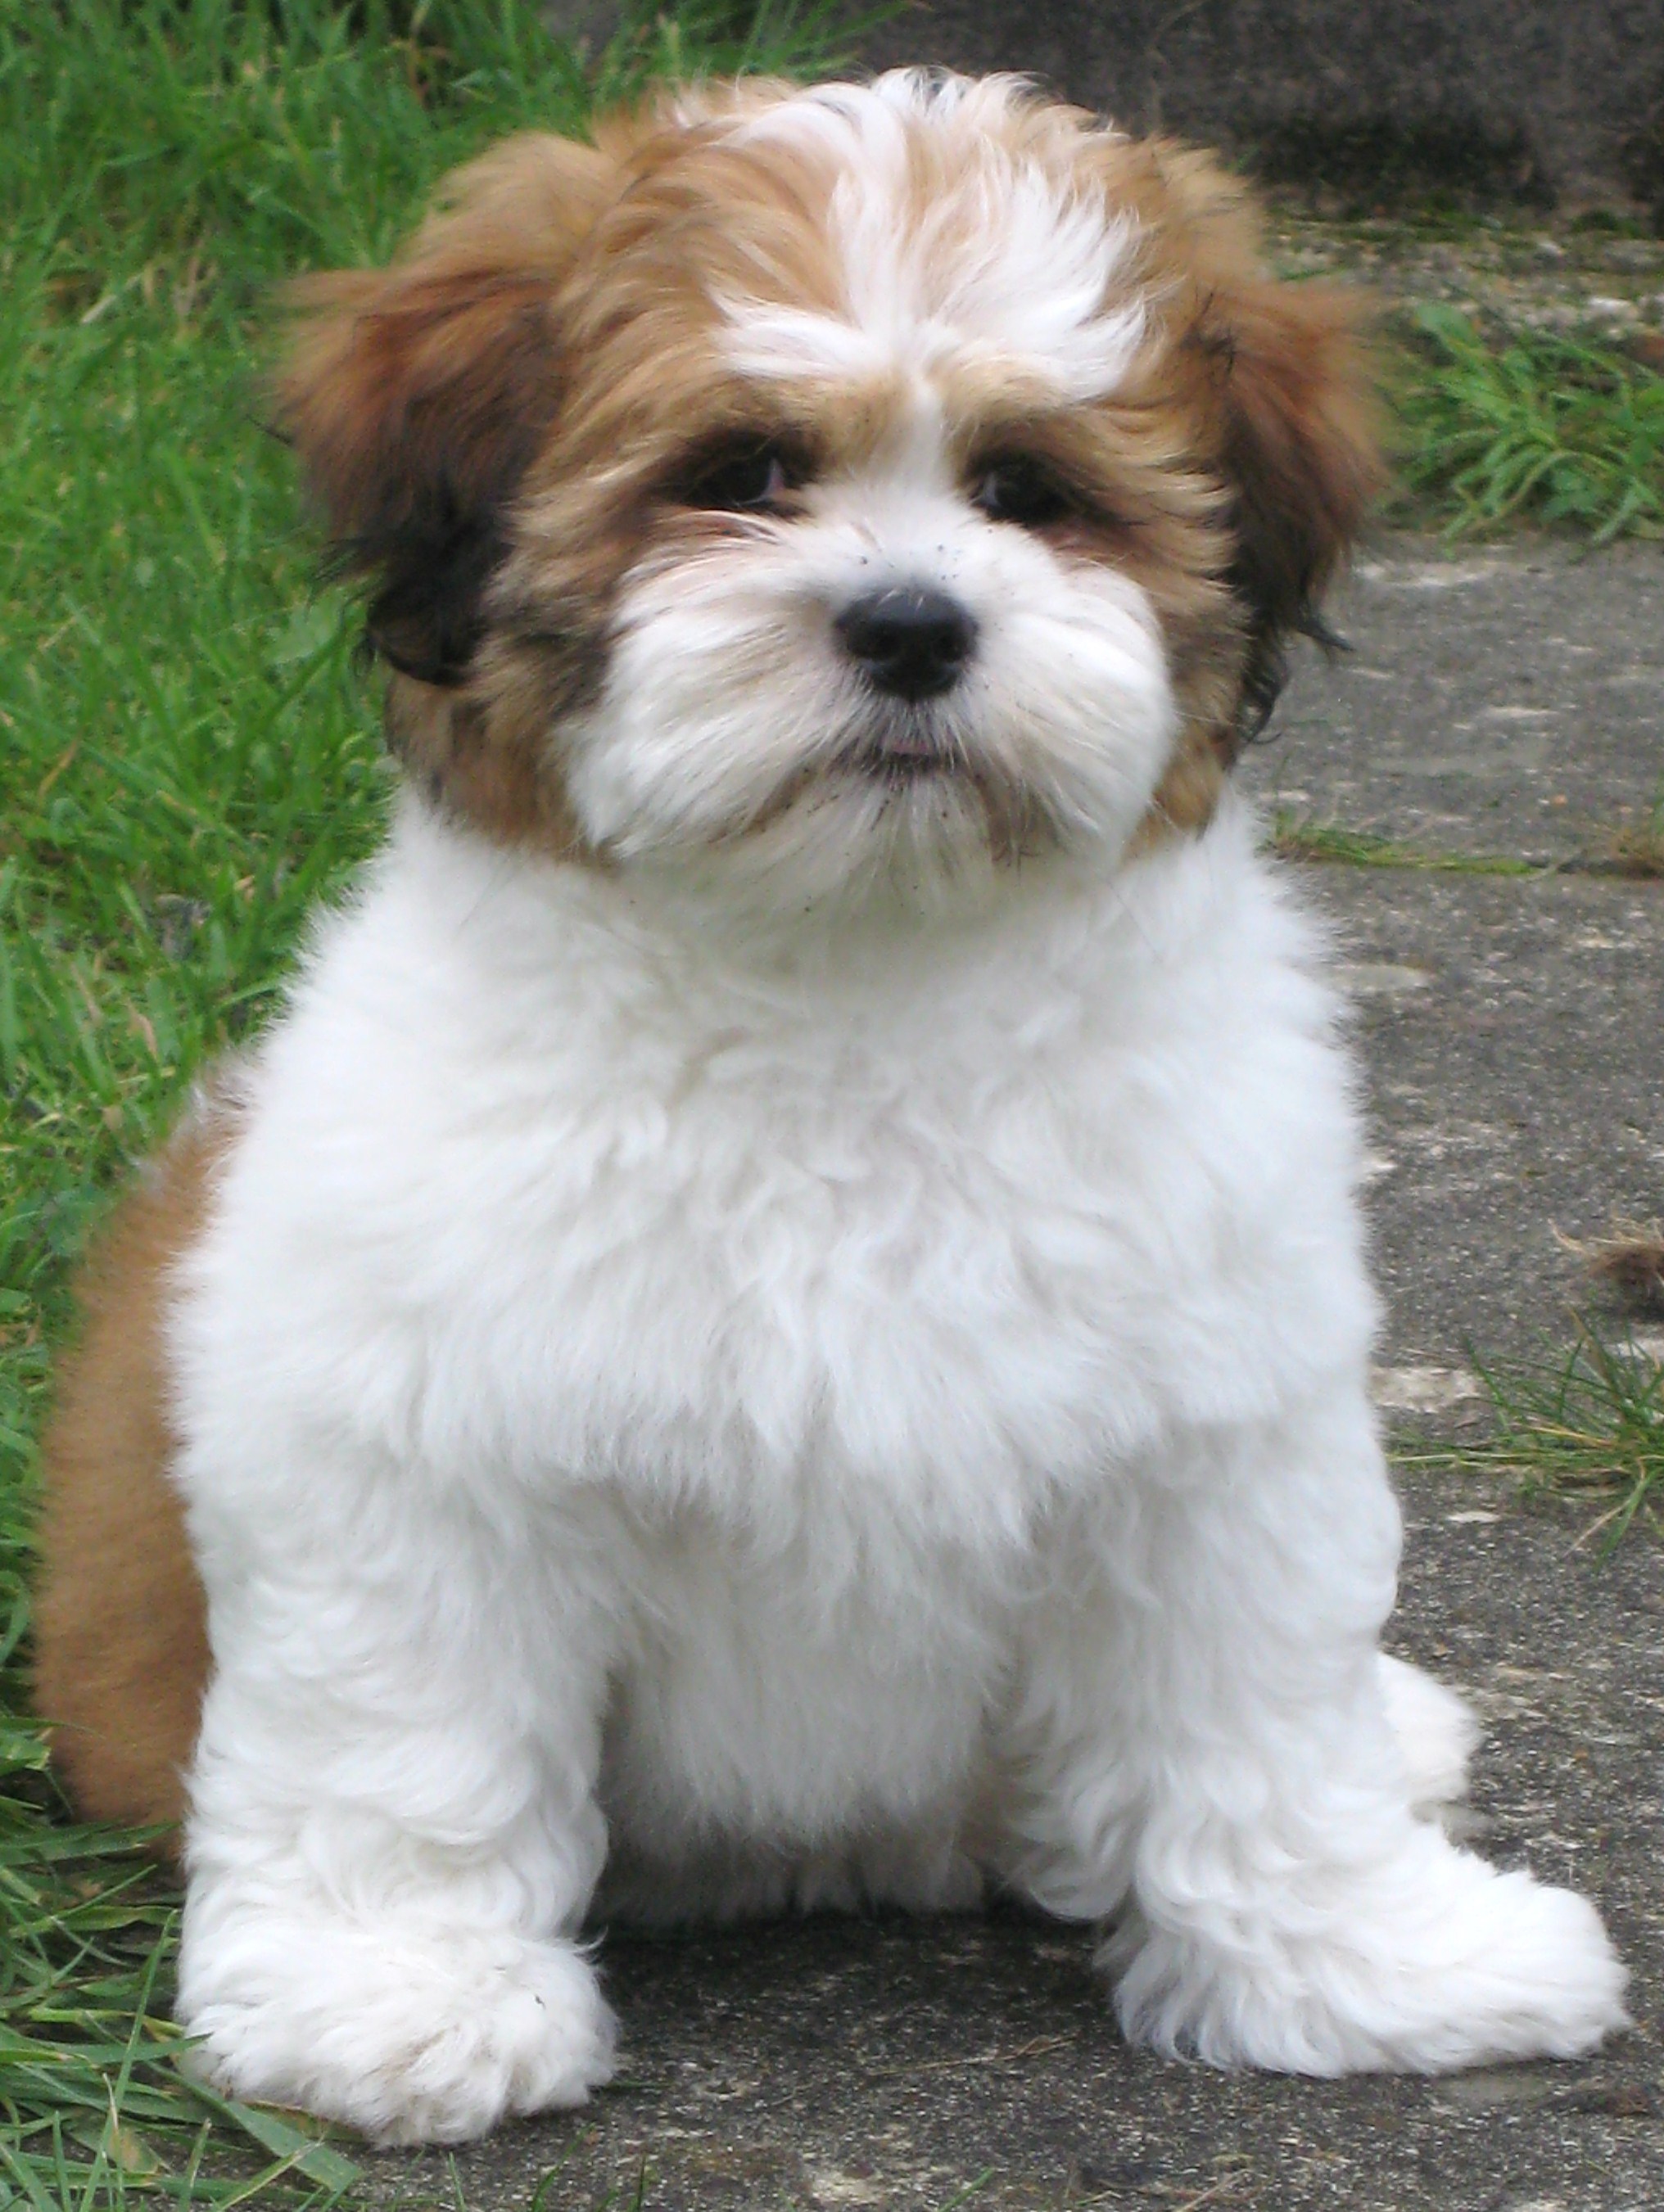 The Dog Breed Lhasa Apso